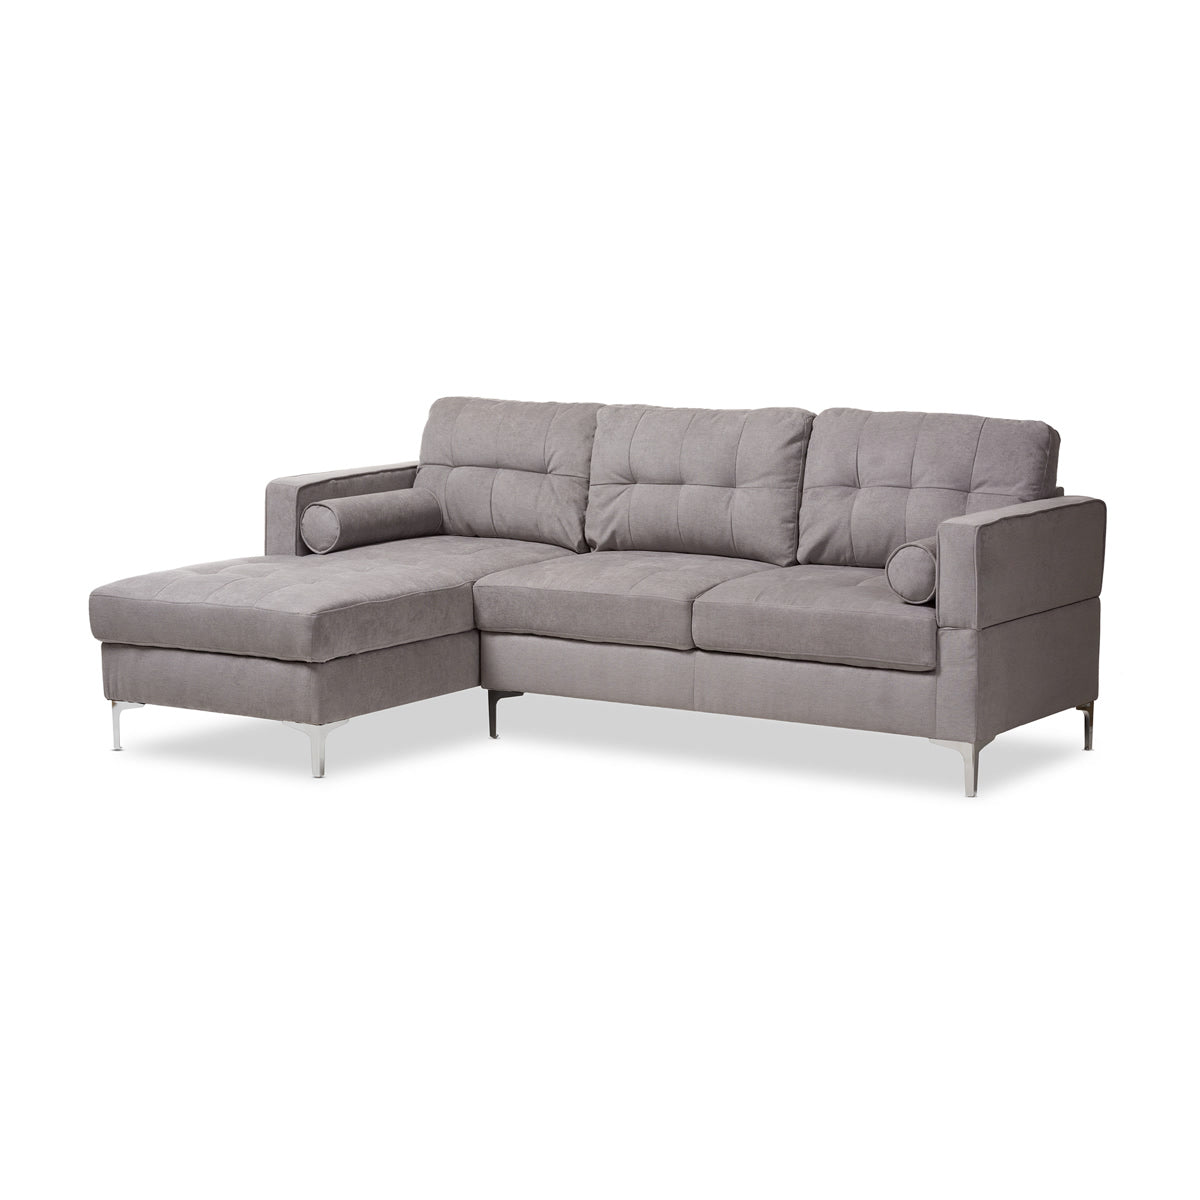 Baxton Studio Mireille Modern and Contemporary Light Grey Fabric Upholstered Sectional Sofa Baxton Studio-sofas-Minimal And Modern - 1